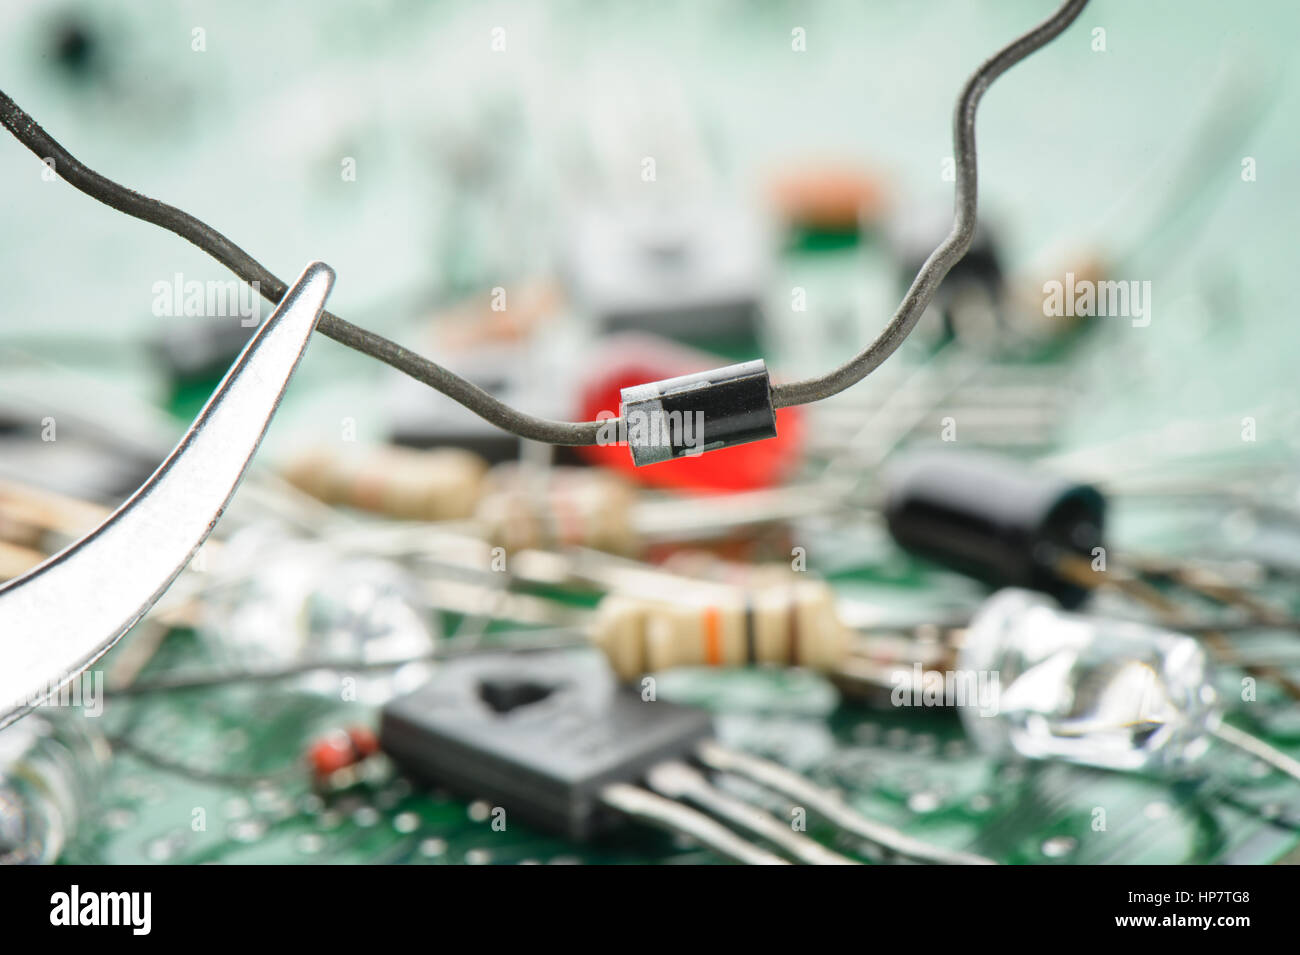 Diode against from heap of electronic parts Stock Photo